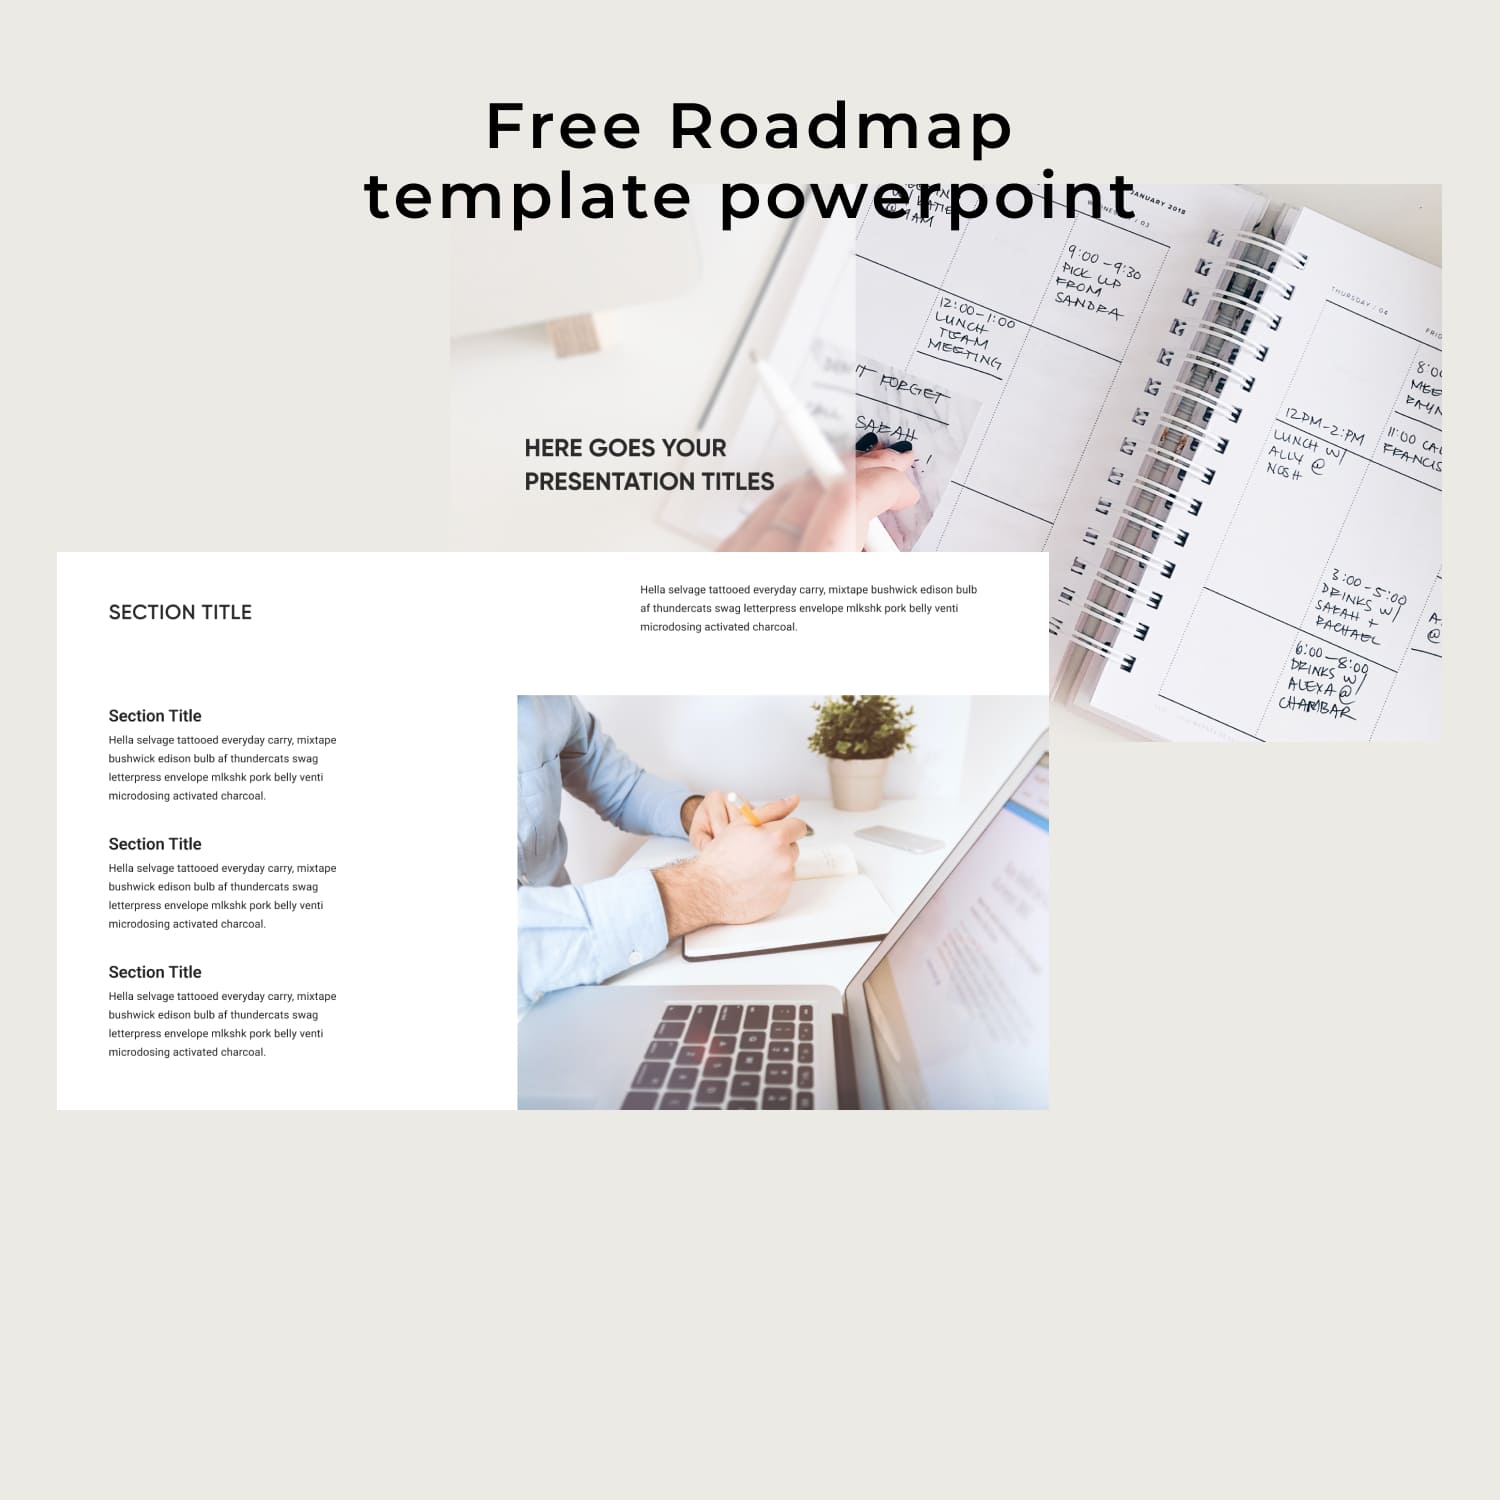 Images with Roadmap Template Powerpoint.